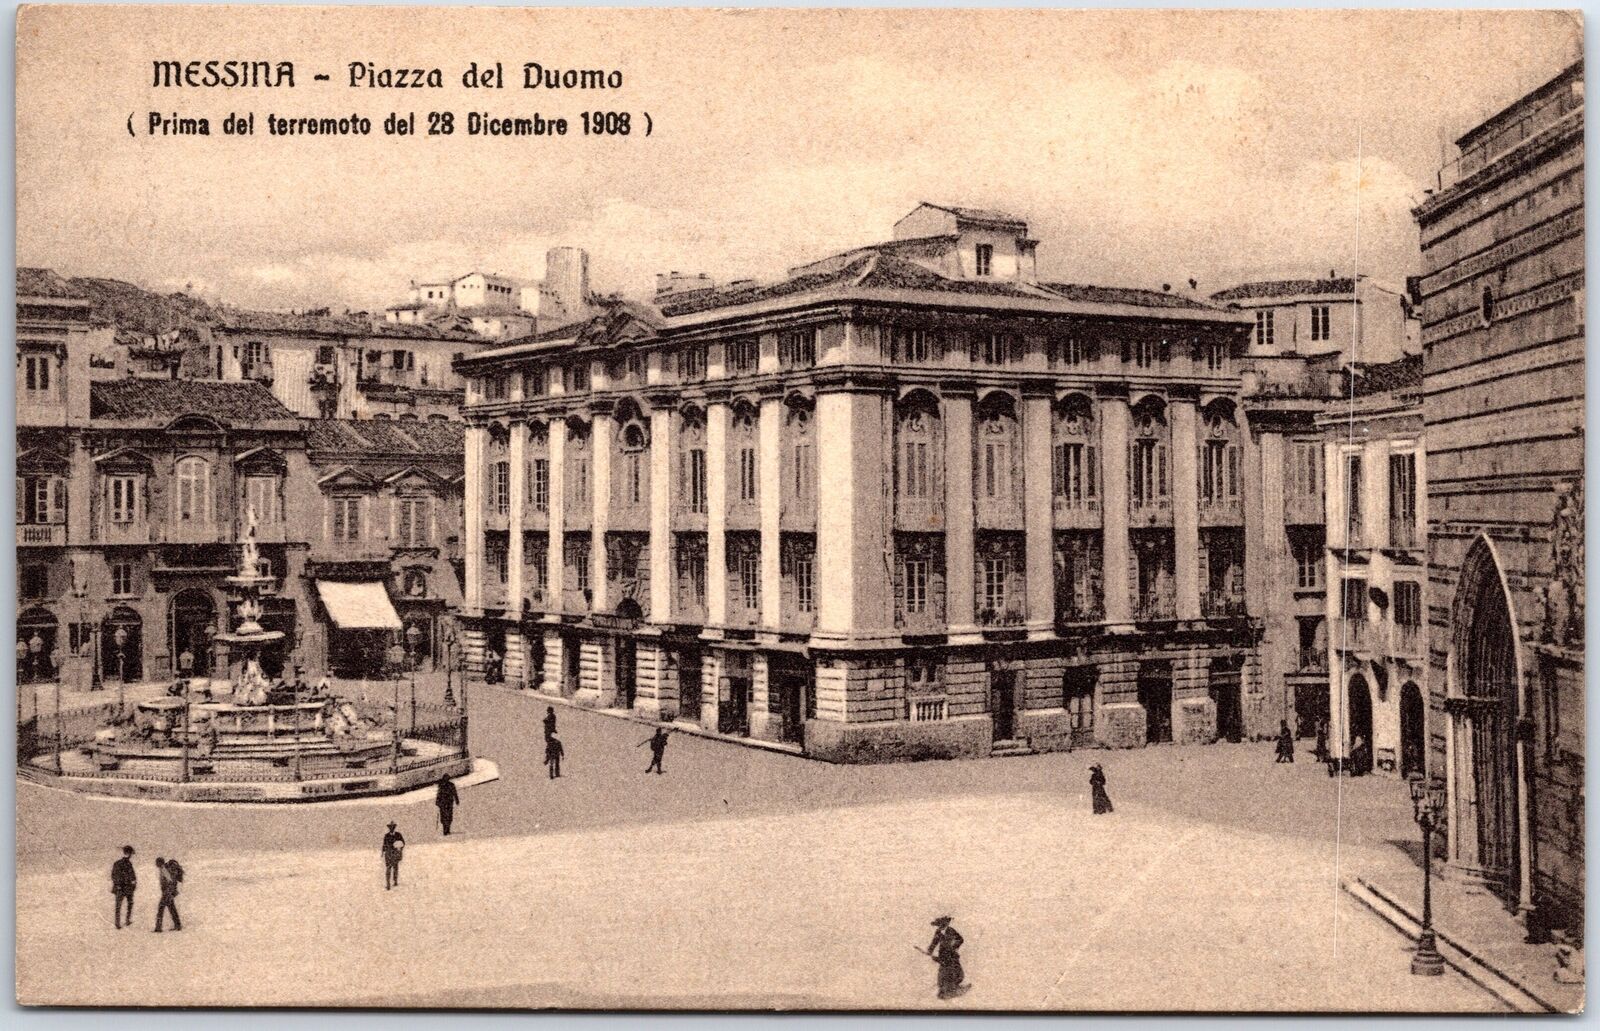 VINTAGE POSTCARD CATHEDRAL SQUARE IN MESSINA ITALY BEFORE THE EARTHQUAKE OF 1908